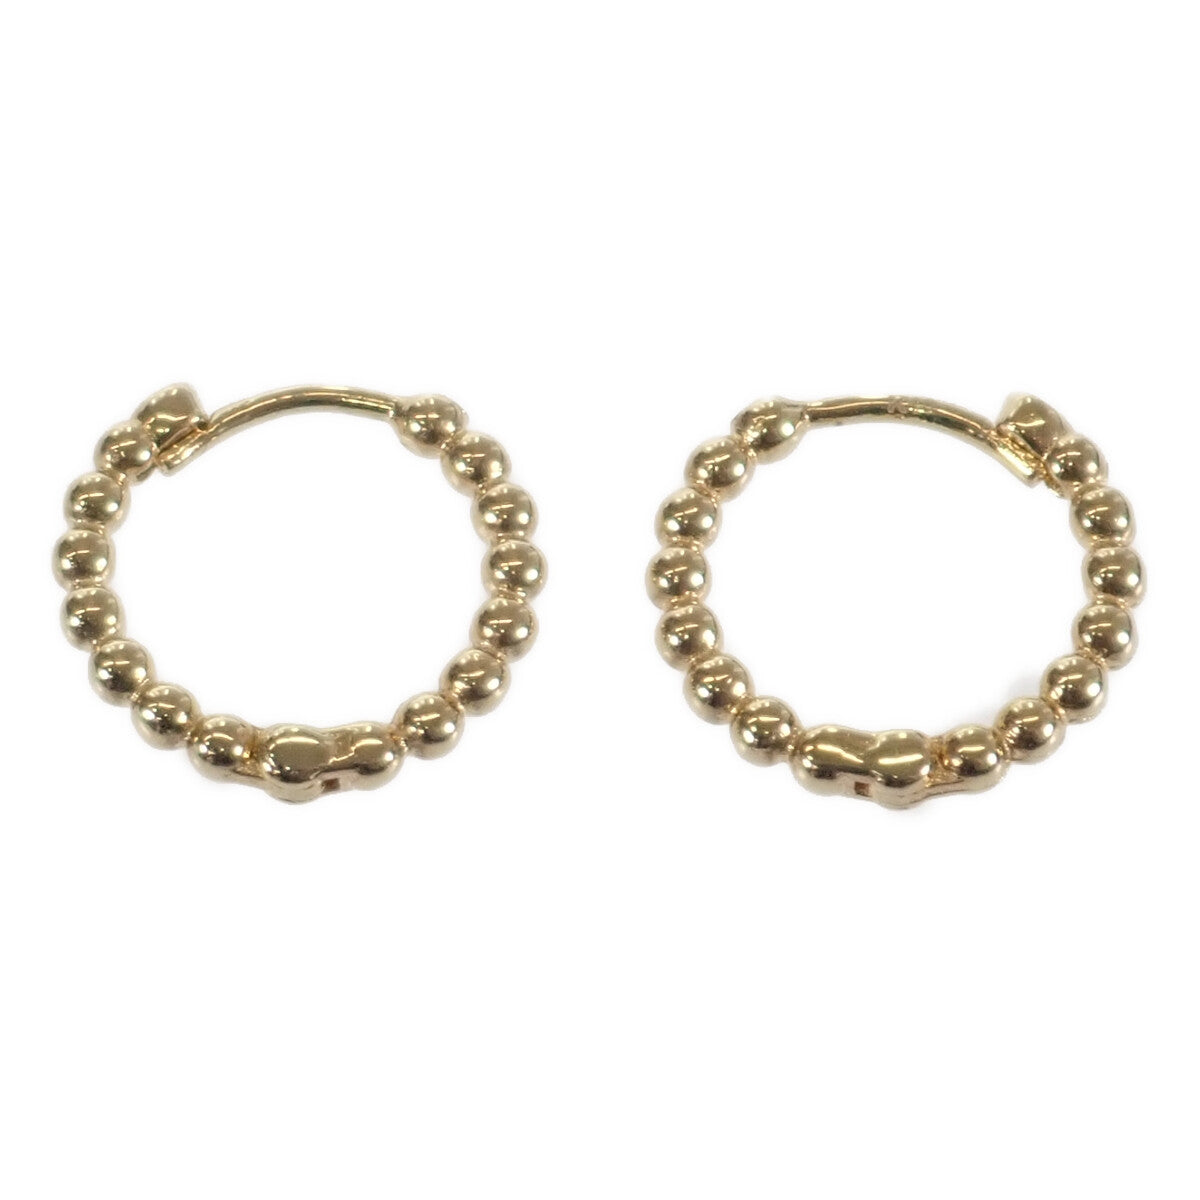 K18 Yellow Gold Ball Hoop Design One-Touch Earrings, Ladies’, Preowned